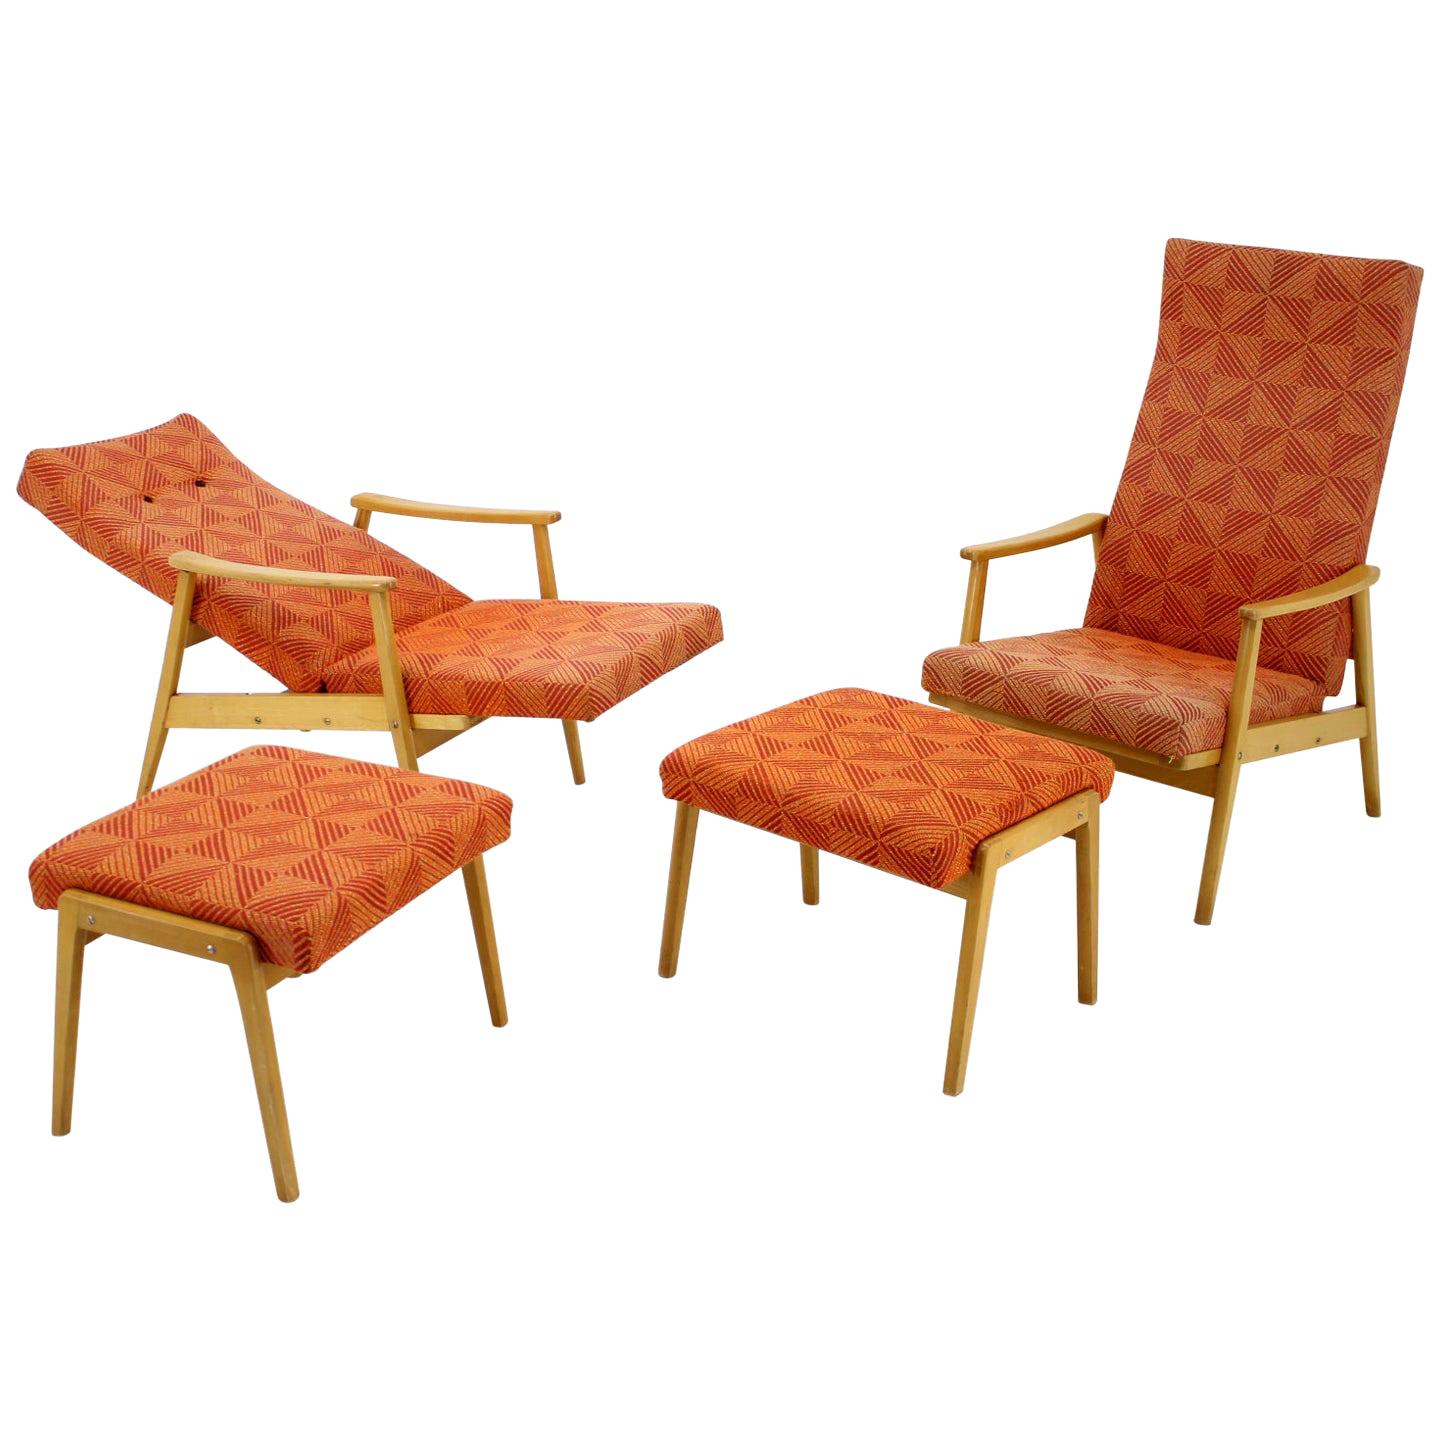 Set Of Two Fred Ward Patterncraft Armchairs With Matching Footstools